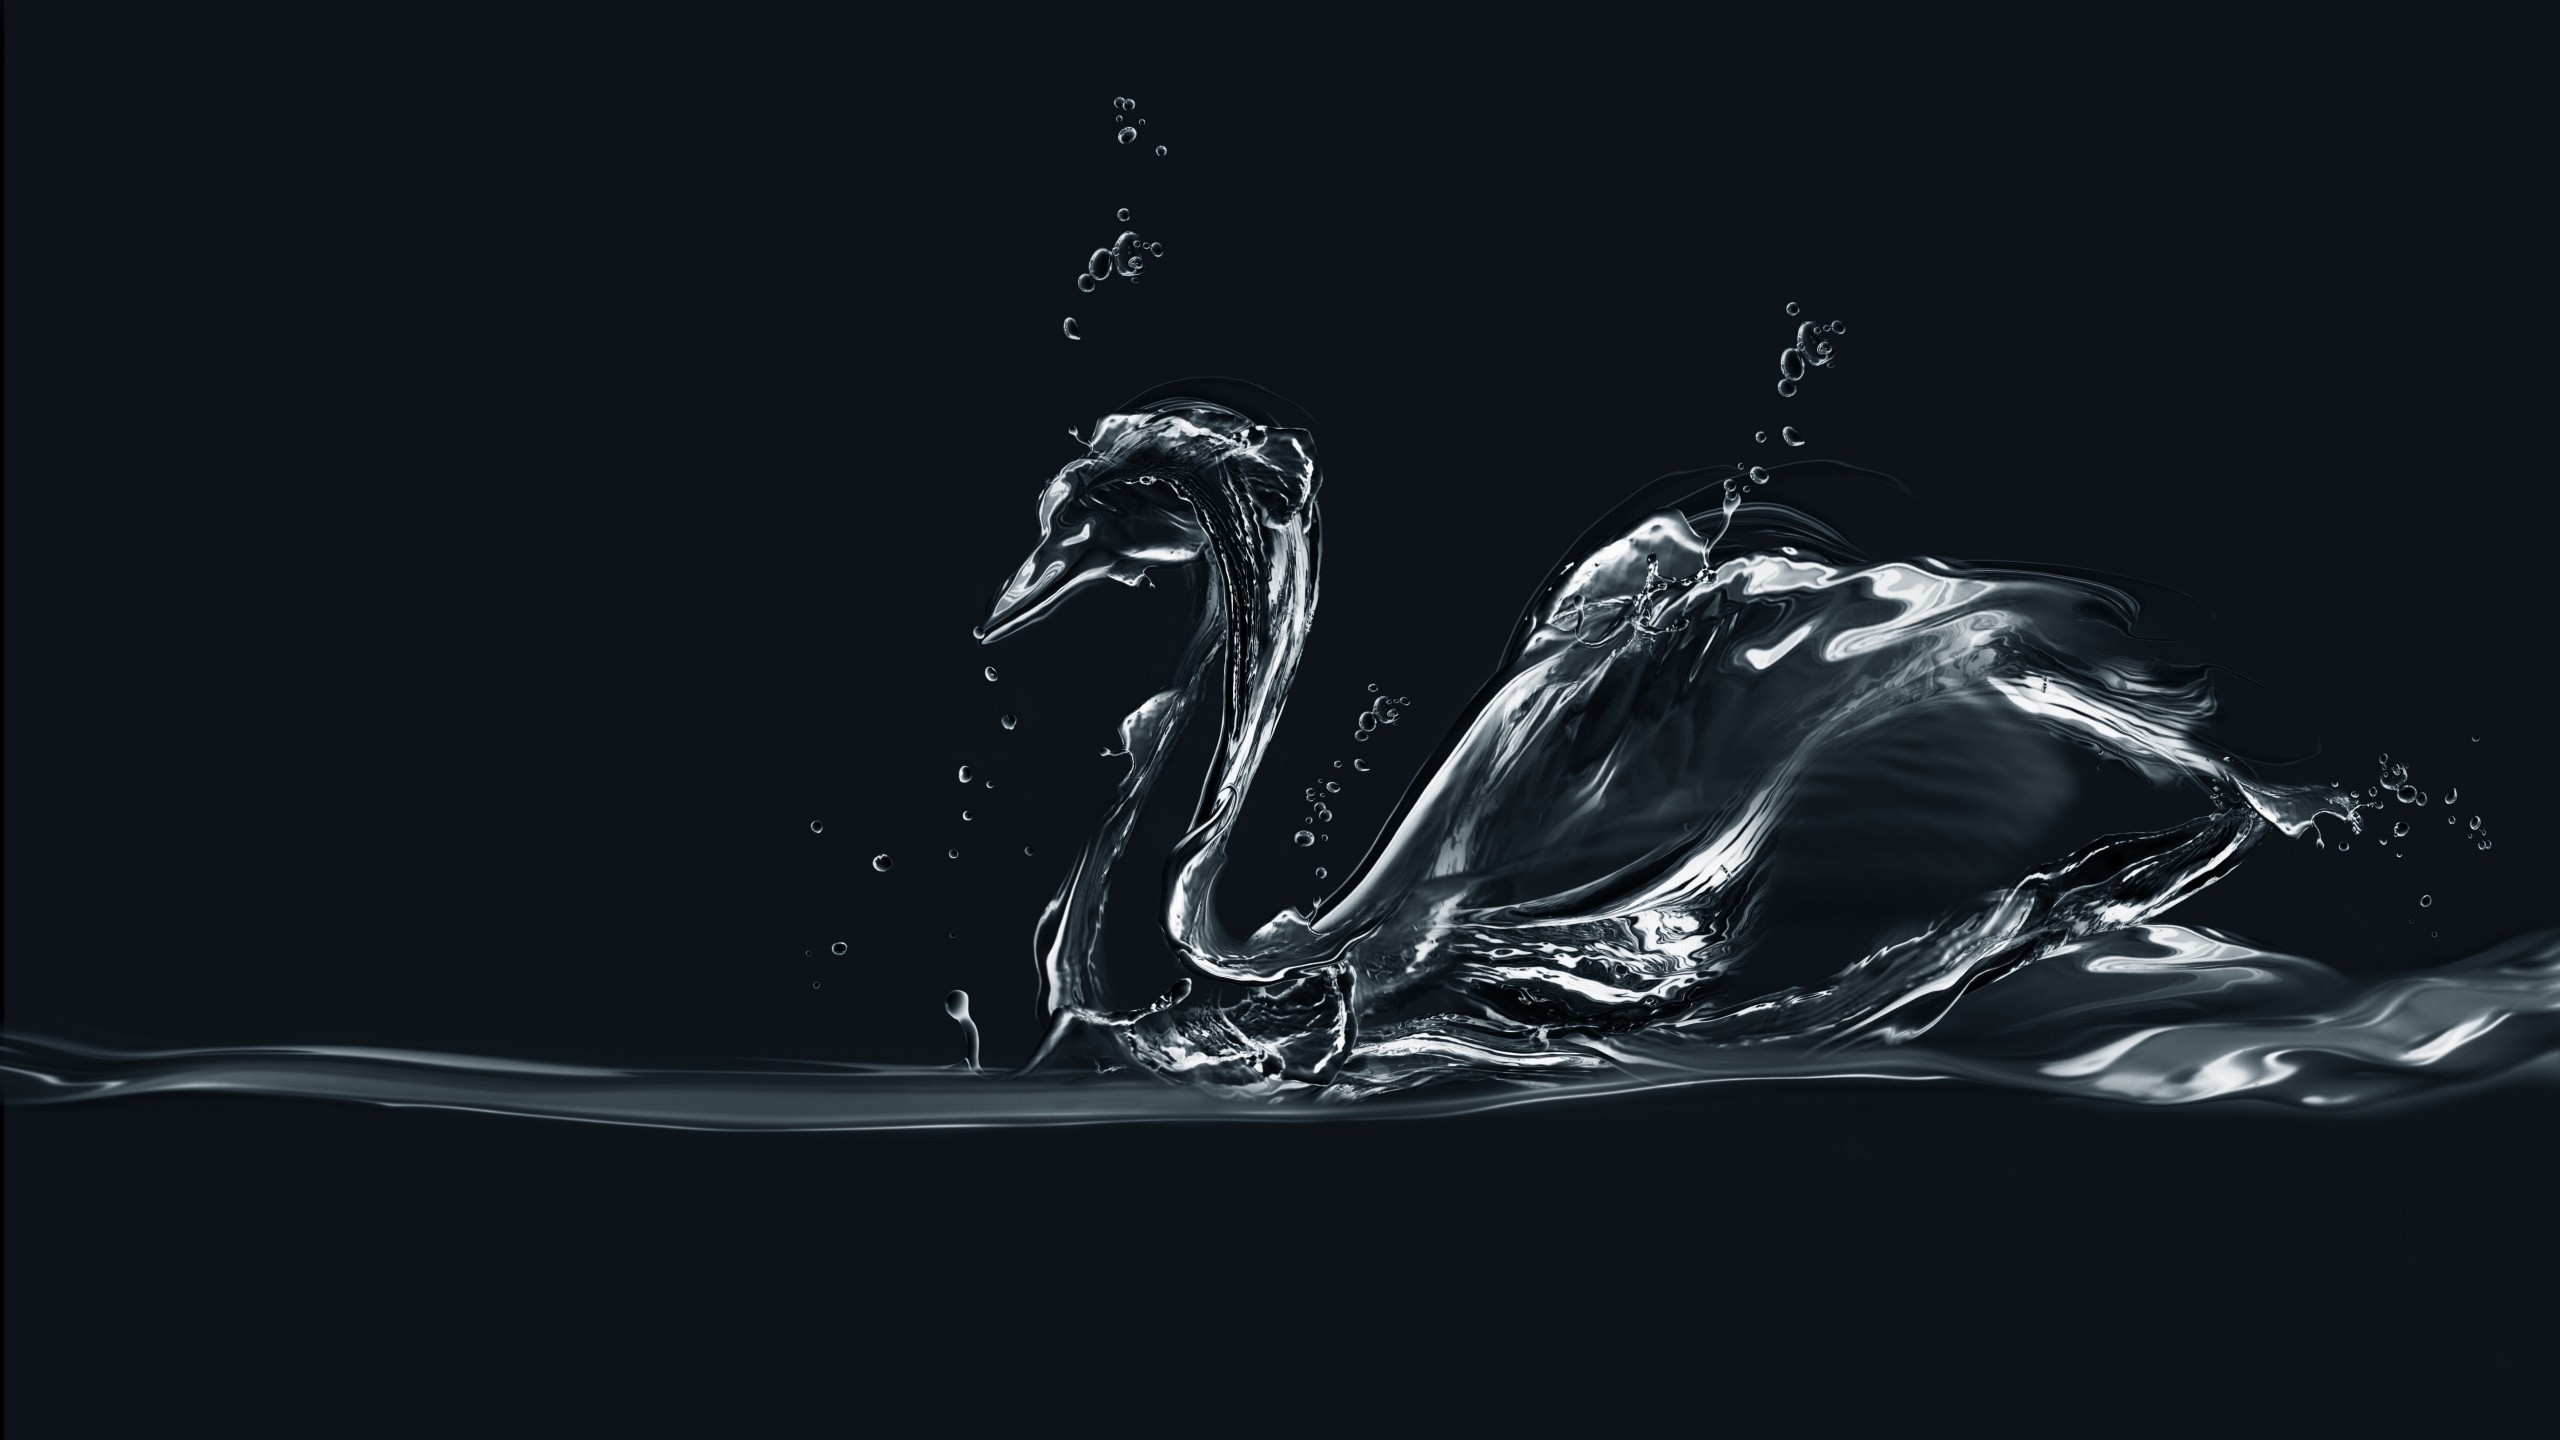 Water Swan for 2560x1440 HDTV resolution